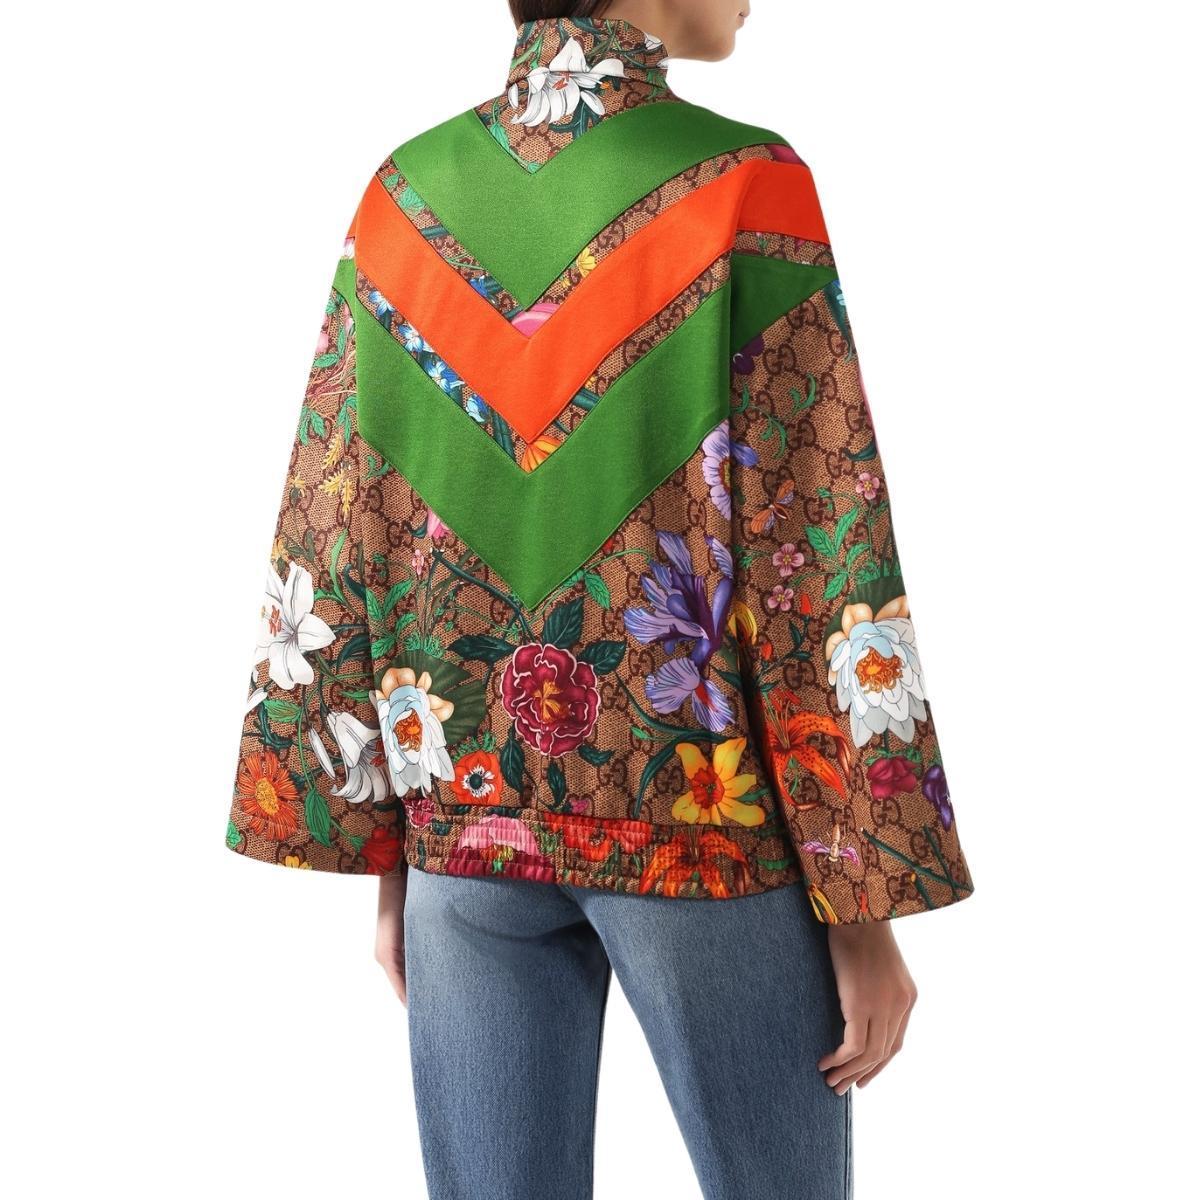 Gucci Flora Gg Supreme Pattern Track Jacket size M In New Condition For Sale In Brossard, QC